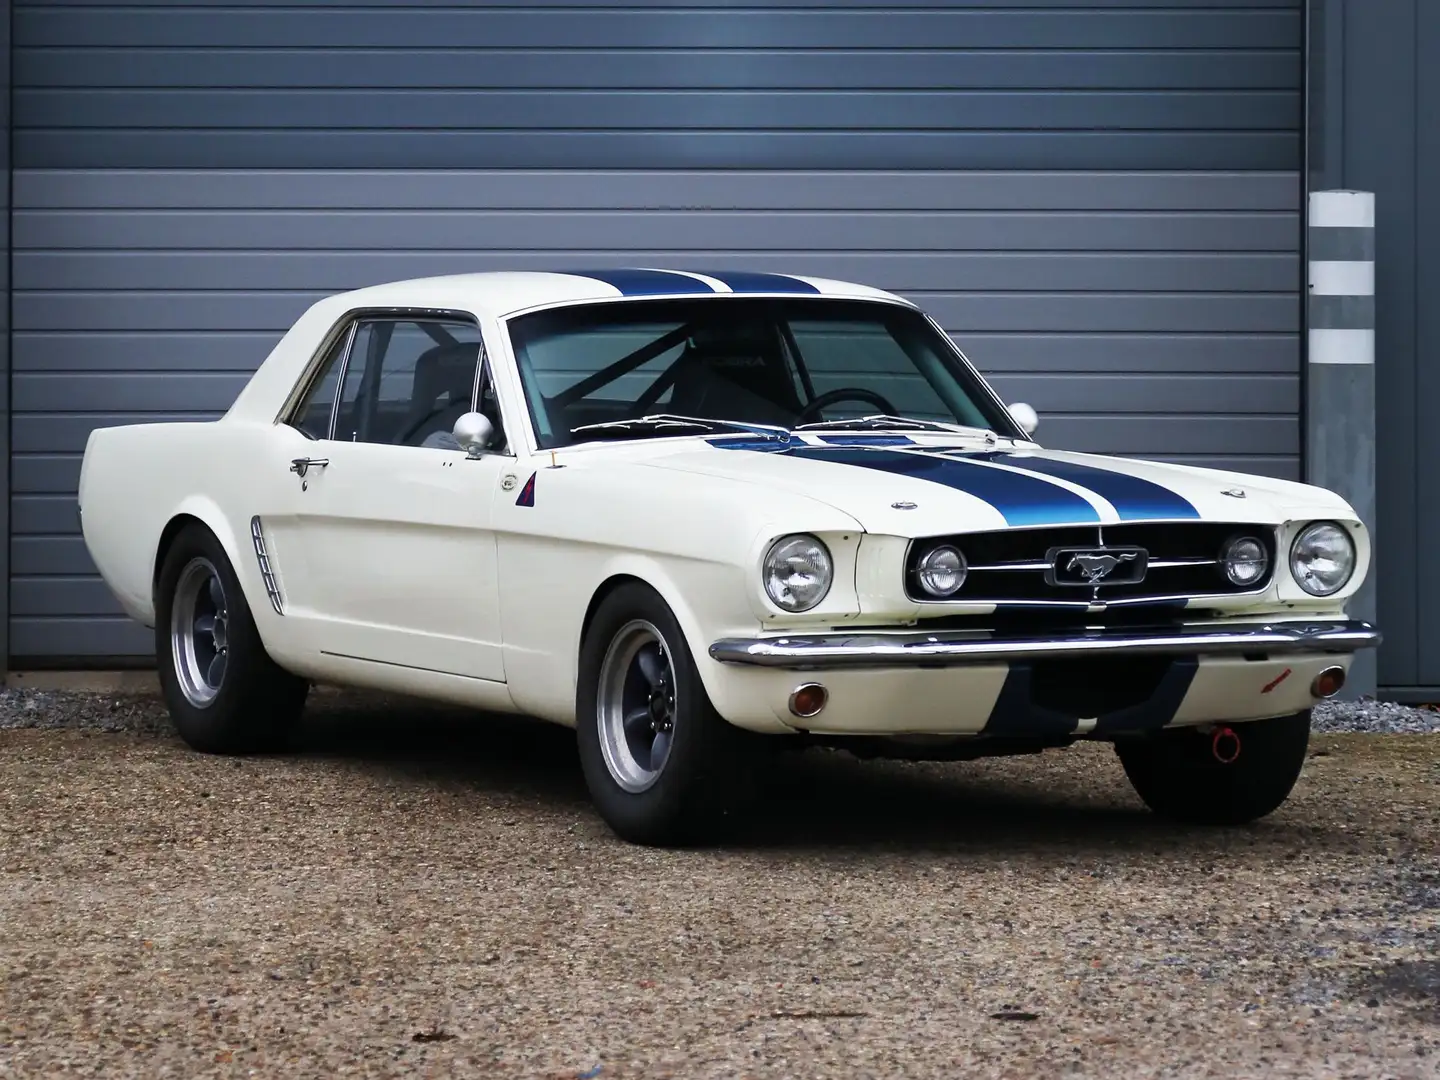 Ford Mustang Group 2 - Road Registered Wit - 1